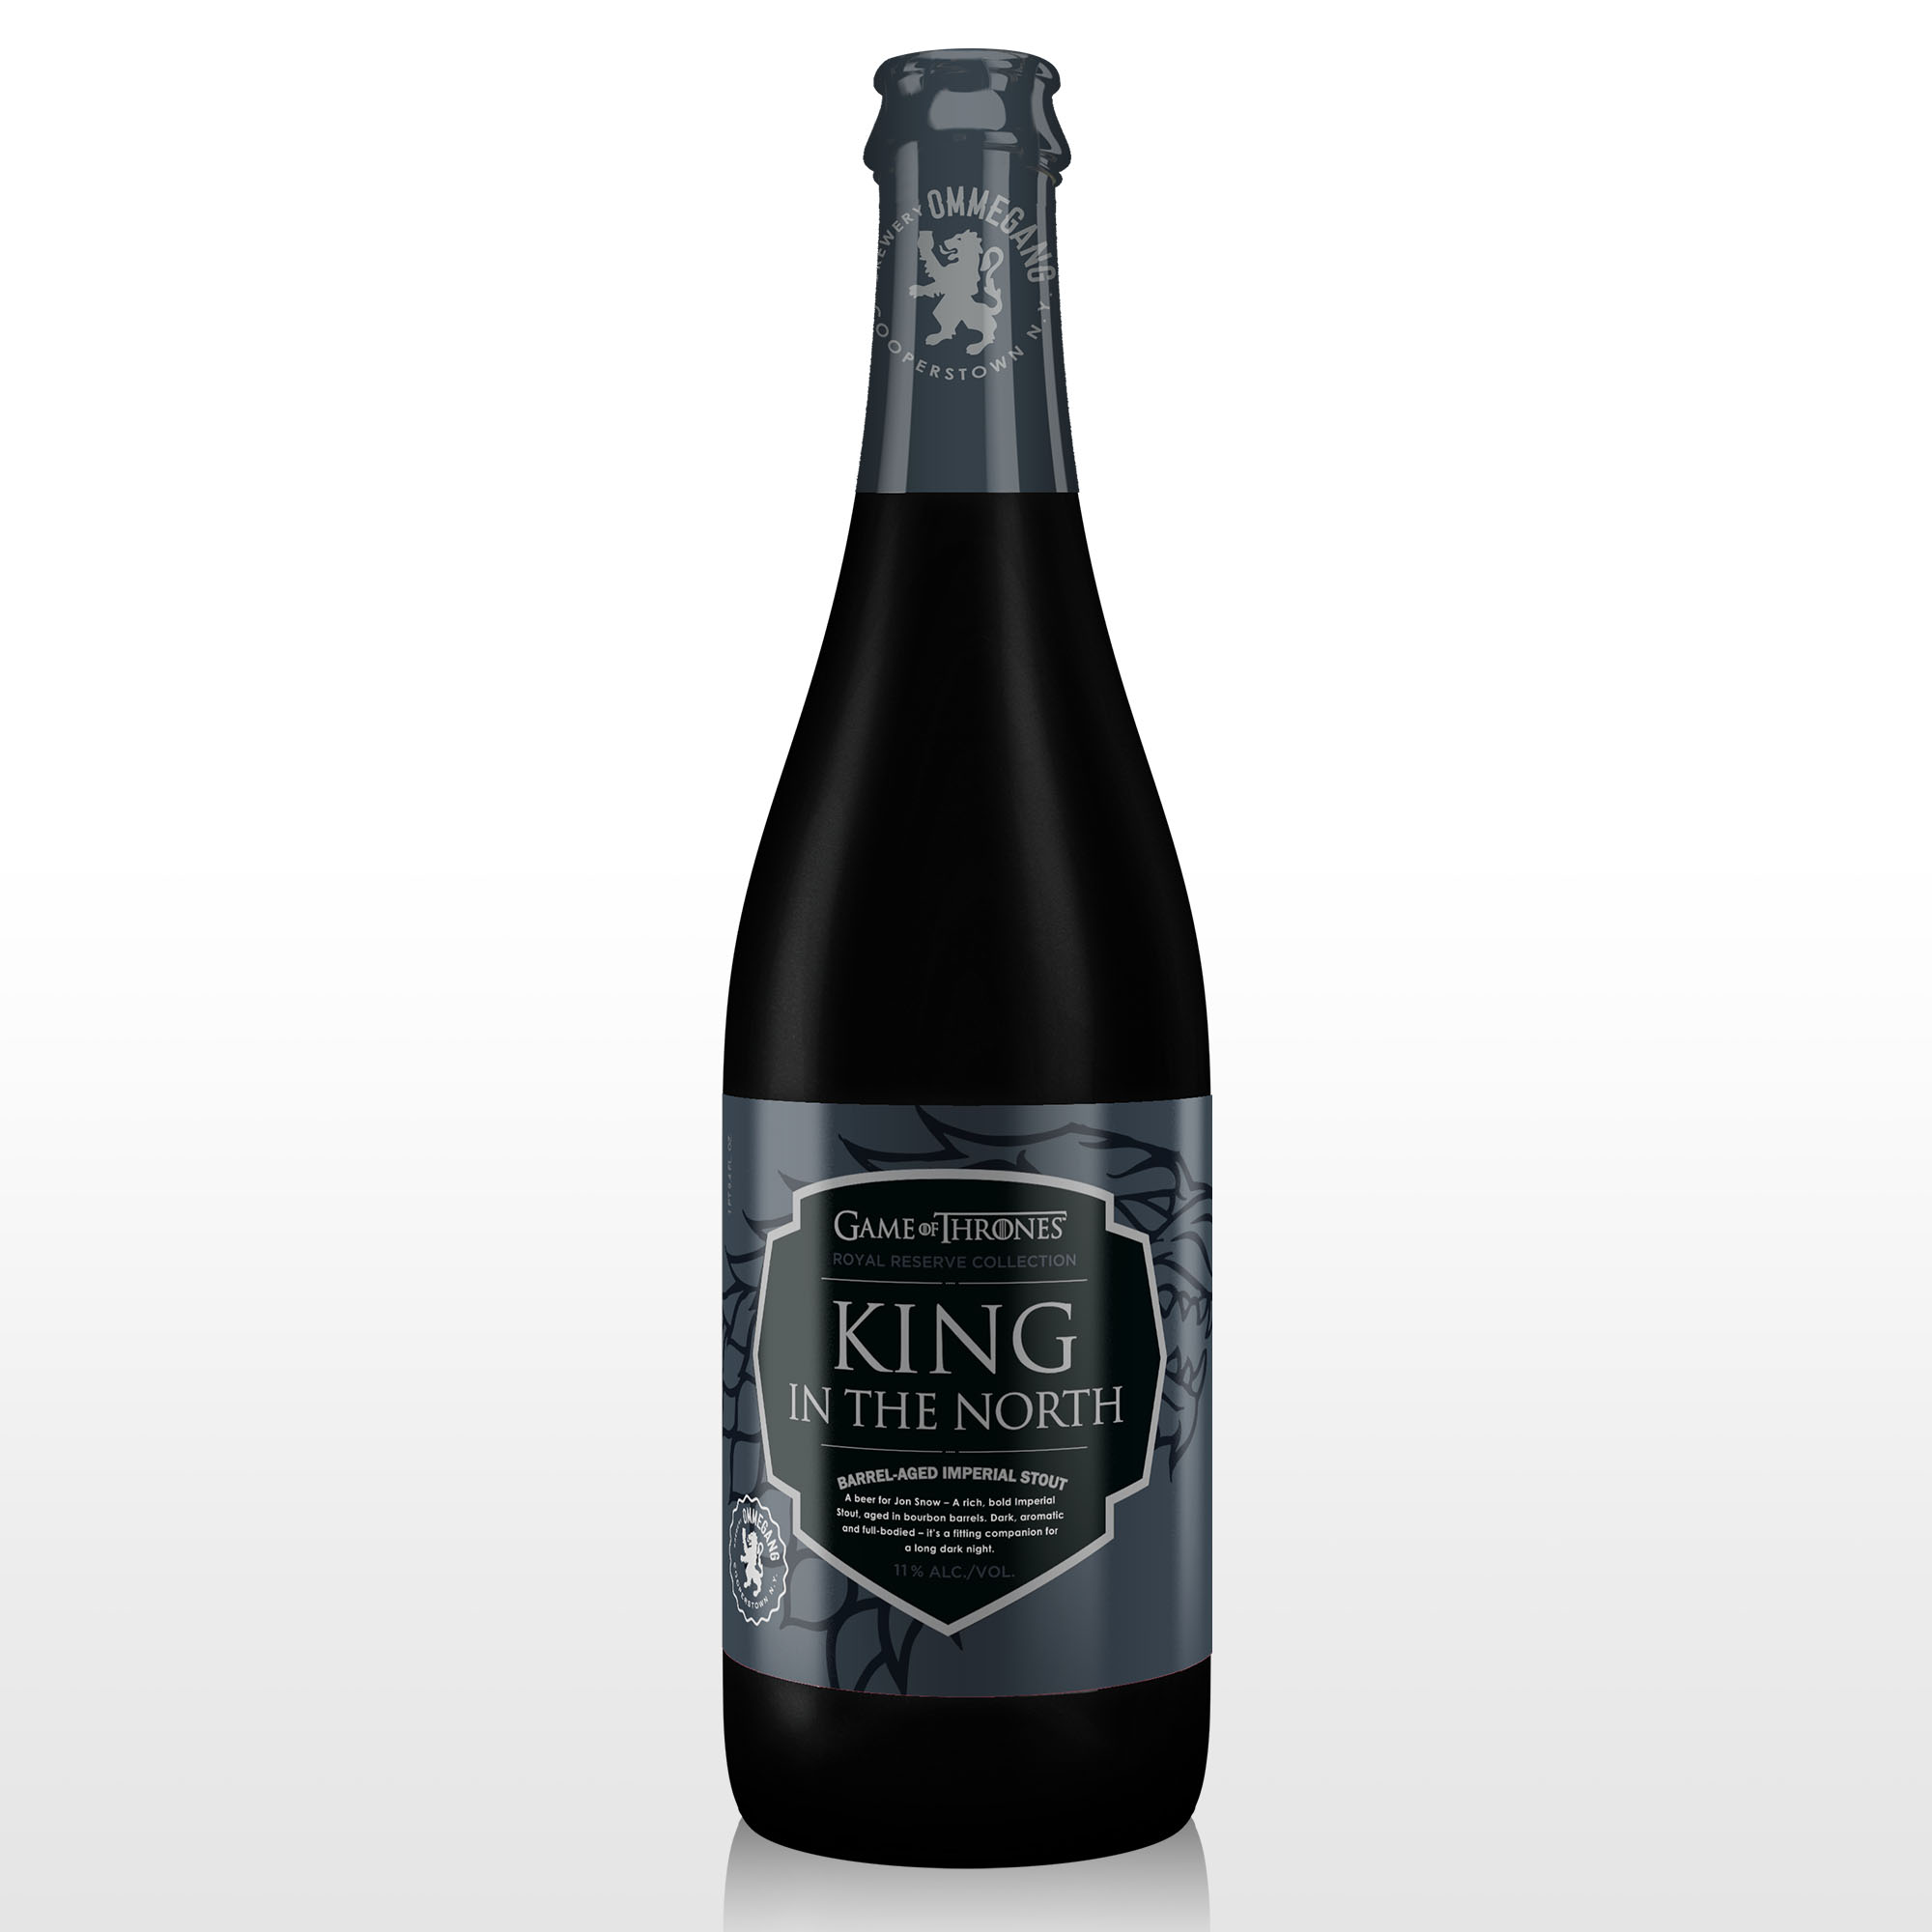 King In The North bottle (Brewery Ommegang)